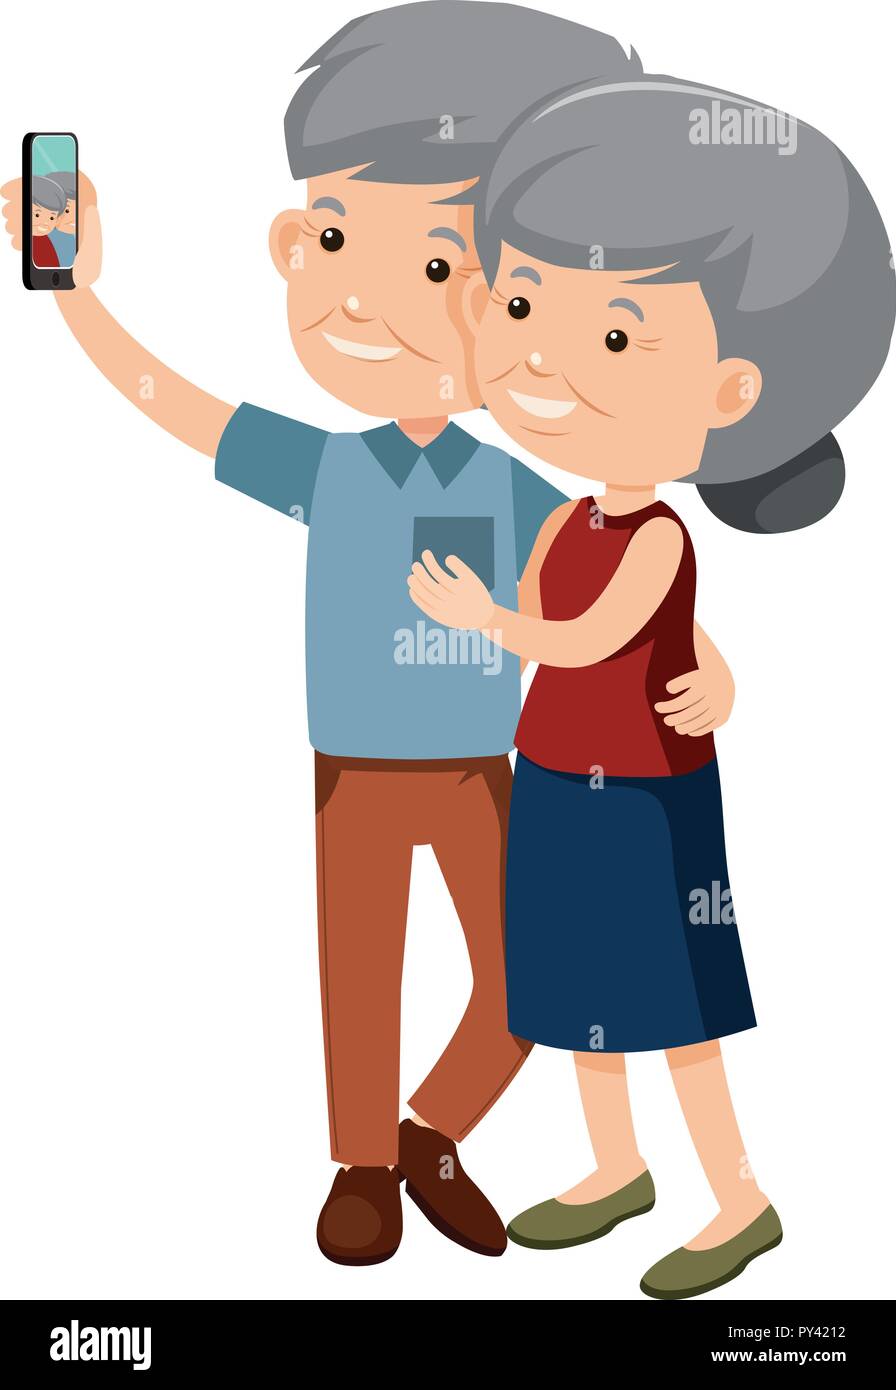 Elderly couple taking a photo together illustration Stock Vector